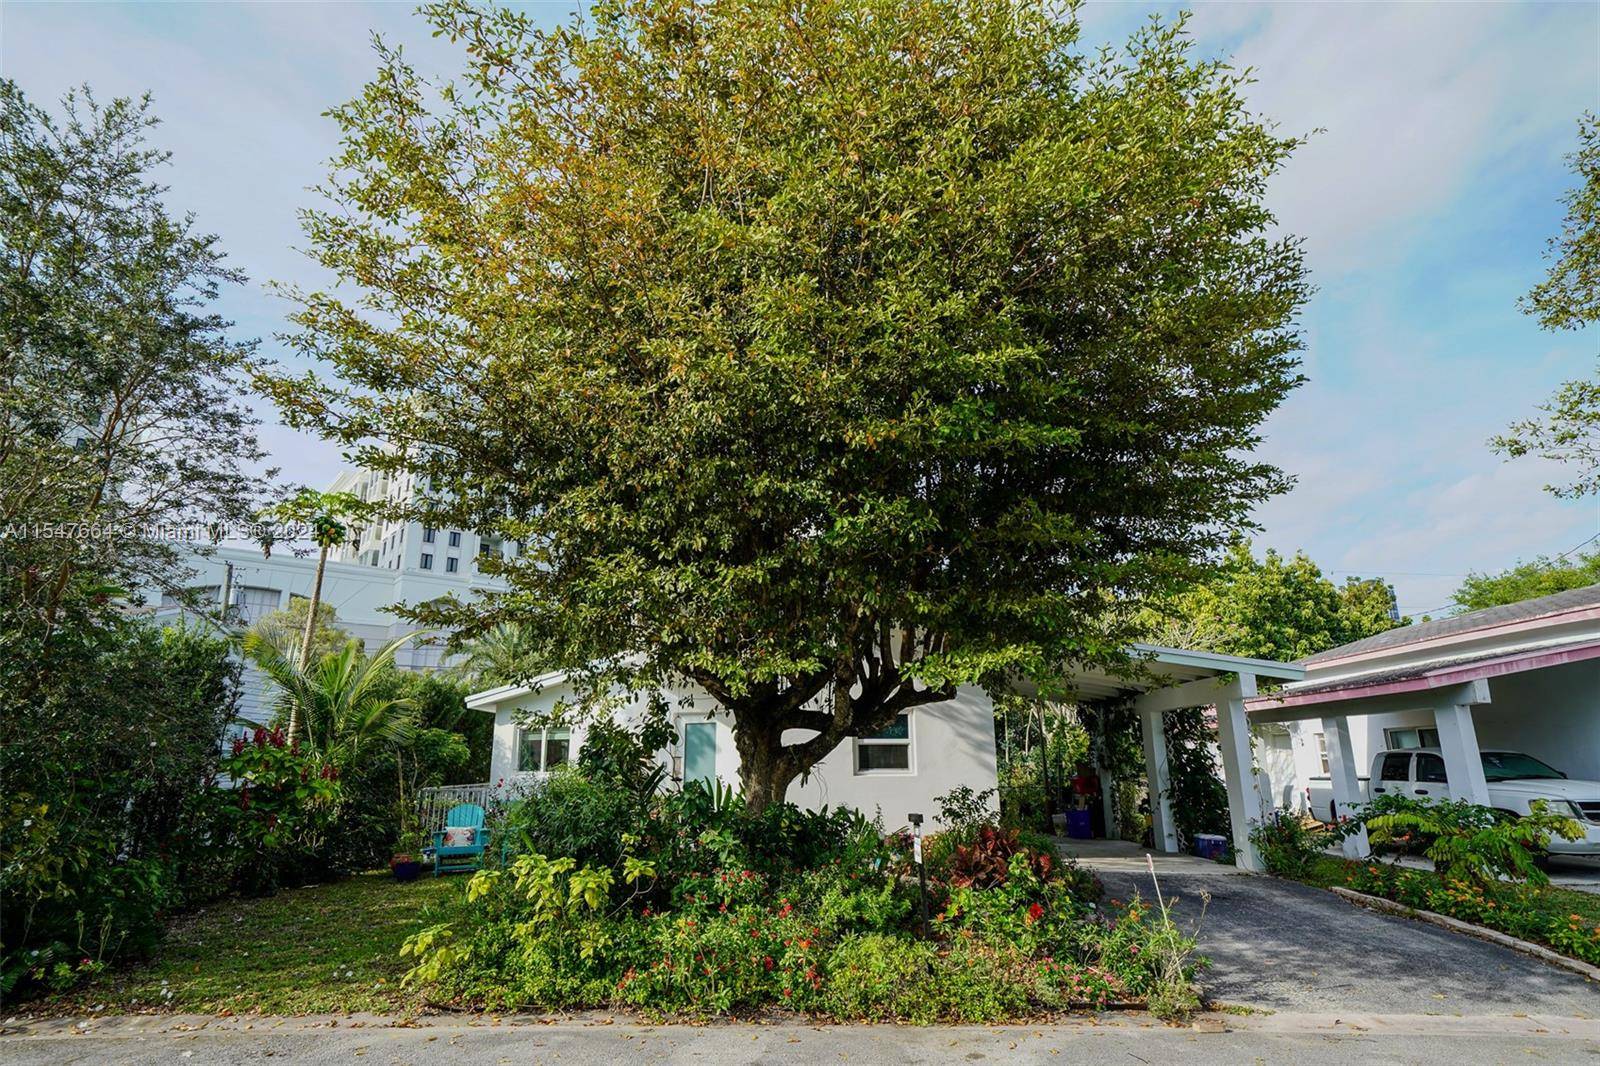 Beautifully updated home in central location within Coral Gables and next to Coconut Grove enjoy the best of both worlds within walking distance !